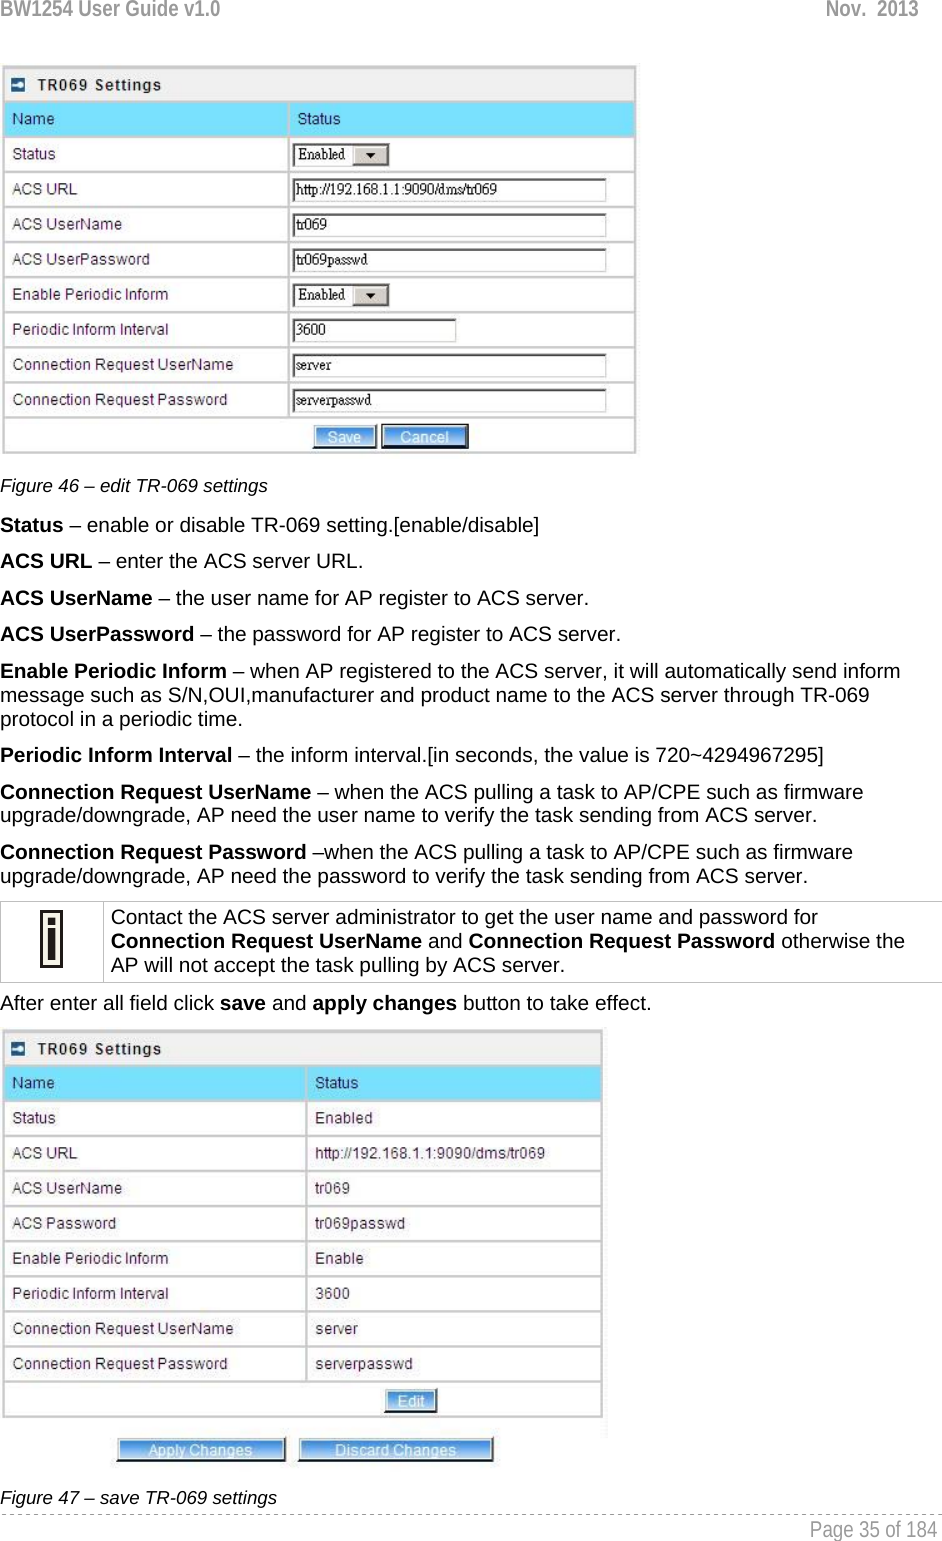 BW1254 User Guide v1.0  Nov.  2013     Page 35 of 184    Figure 46 – edit TR-069 settings Status – enable or disable TR-069 setting.[enable/disable] ACS URL – enter the ACS server URL. ACS UserName – the user name for AP register to ACS server. ACS UserPassword – the password for AP register to ACS server. Enable Periodic Inform – when AP registered to the ACS server, it will automatically send inform message such as S/N,OUI,manufacturer and product name to the ACS server through TR-069 protocol in a periodic time. Periodic Inform Interval – the inform interval.[in seconds, the value is 720~4294967295] Connection Request UserName – when the ACS pulling a task to AP/CPE such as firmware upgrade/downgrade, AP need the user name to verify the task sending from ACS server. Connection Request Password –when the ACS pulling a task to AP/CPE such as firmware upgrade/downgrade, AP need the password to verify the task sending from ACS server.  Contact the ACS server administrator to get the user name and password for Connection Request UserName and Connection Request Password otherwise the AP will not accept the task pulling by ACS server. After enter all field click save and apply changes button to take effect.  Figure 47 – save TR-069 settings 